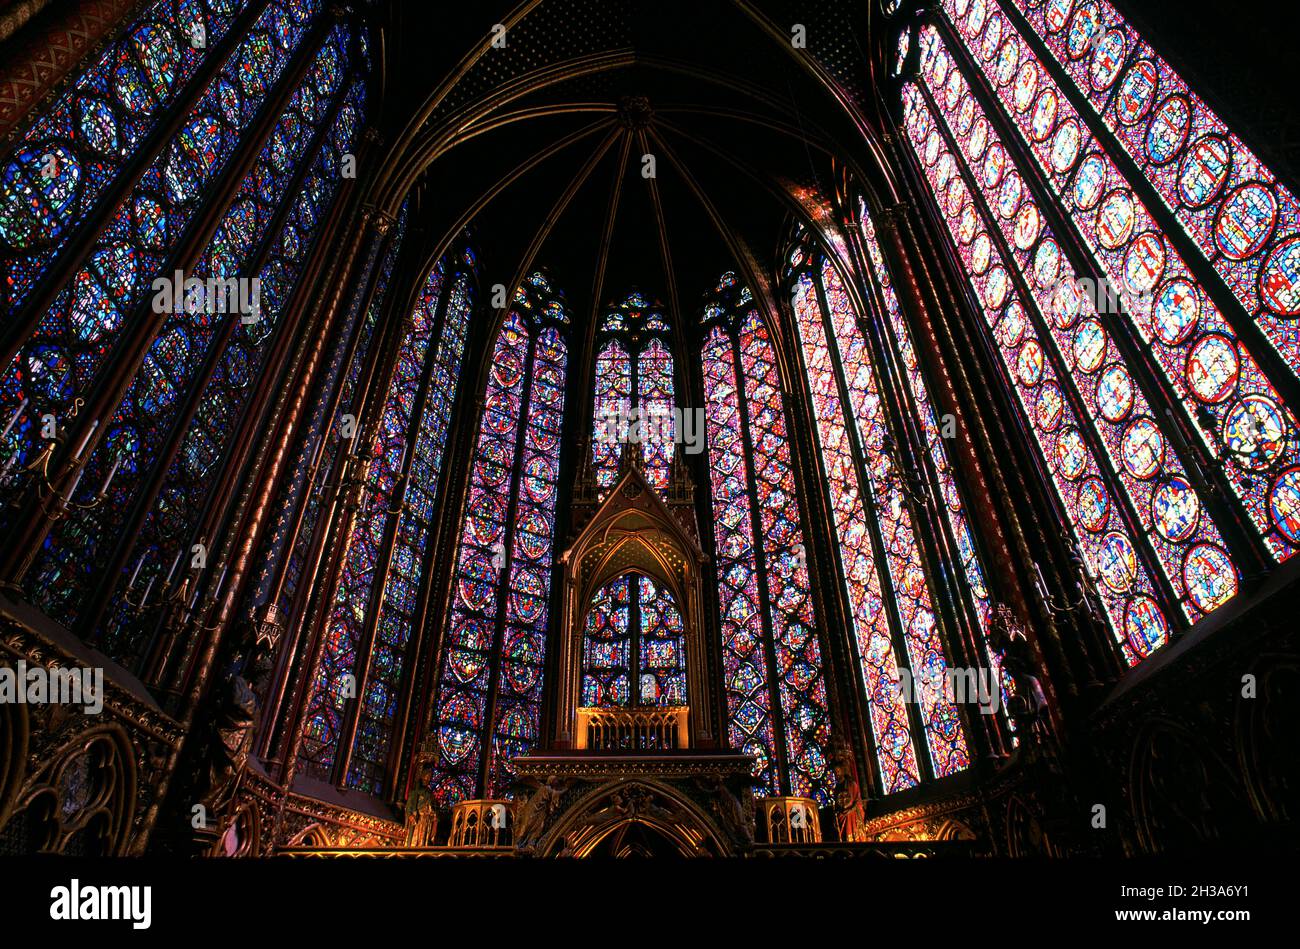 FRANCE. PARIS (75) SAINTE CHAPELLE (THE GLASS OF THE 13TH CENTURY CHEVET) WITH ITS GOTHIC ARCHITECTURE Stock Photo